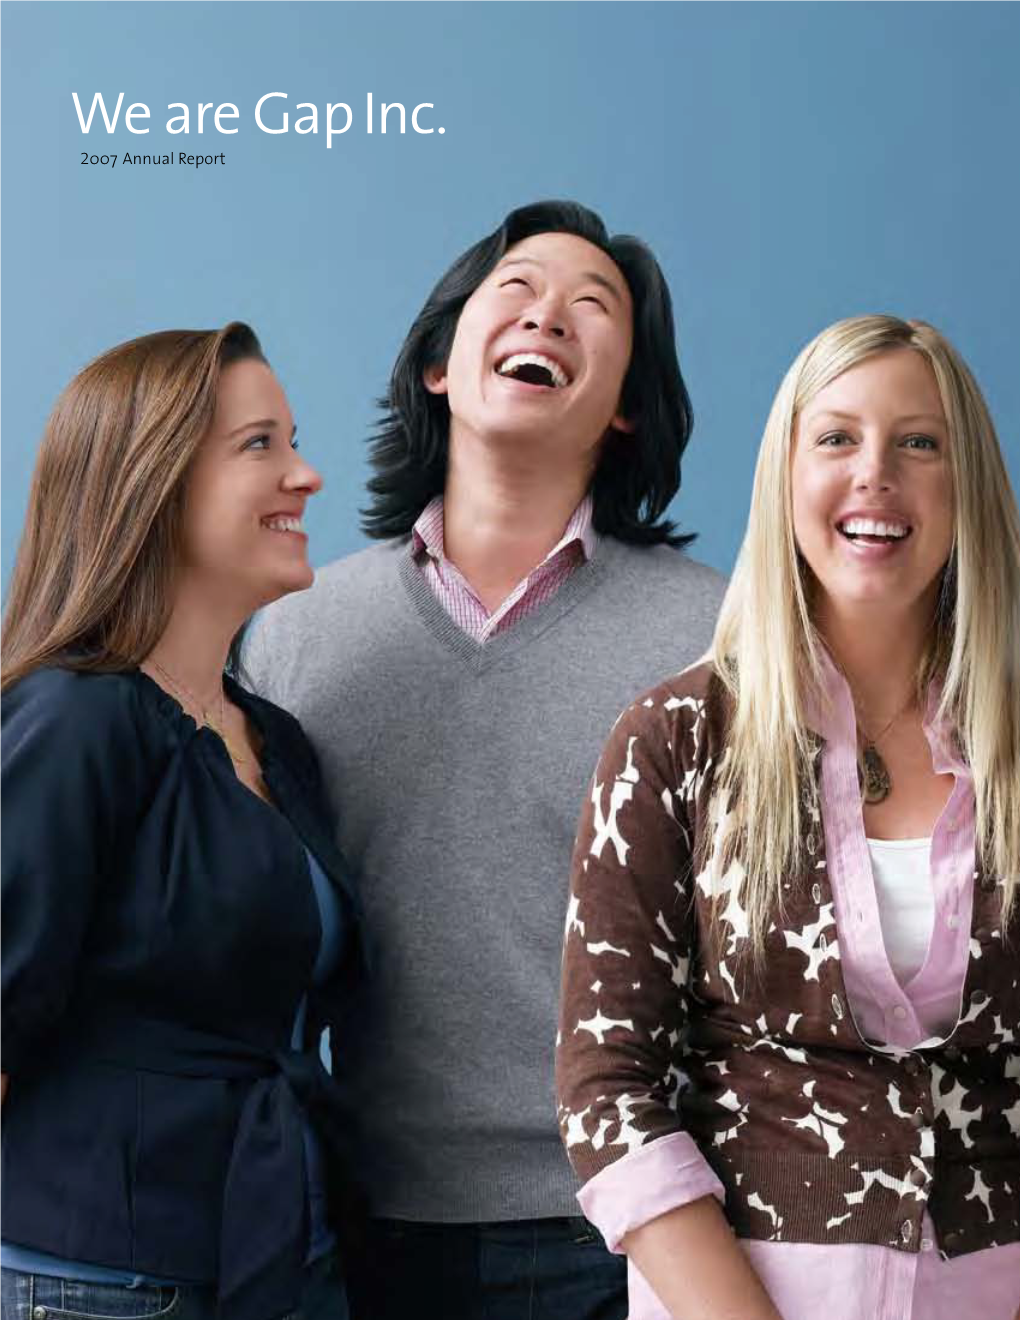 Gap Inc. 2007 Annual Report We Love Designing Clothes That Are Fun to Wear